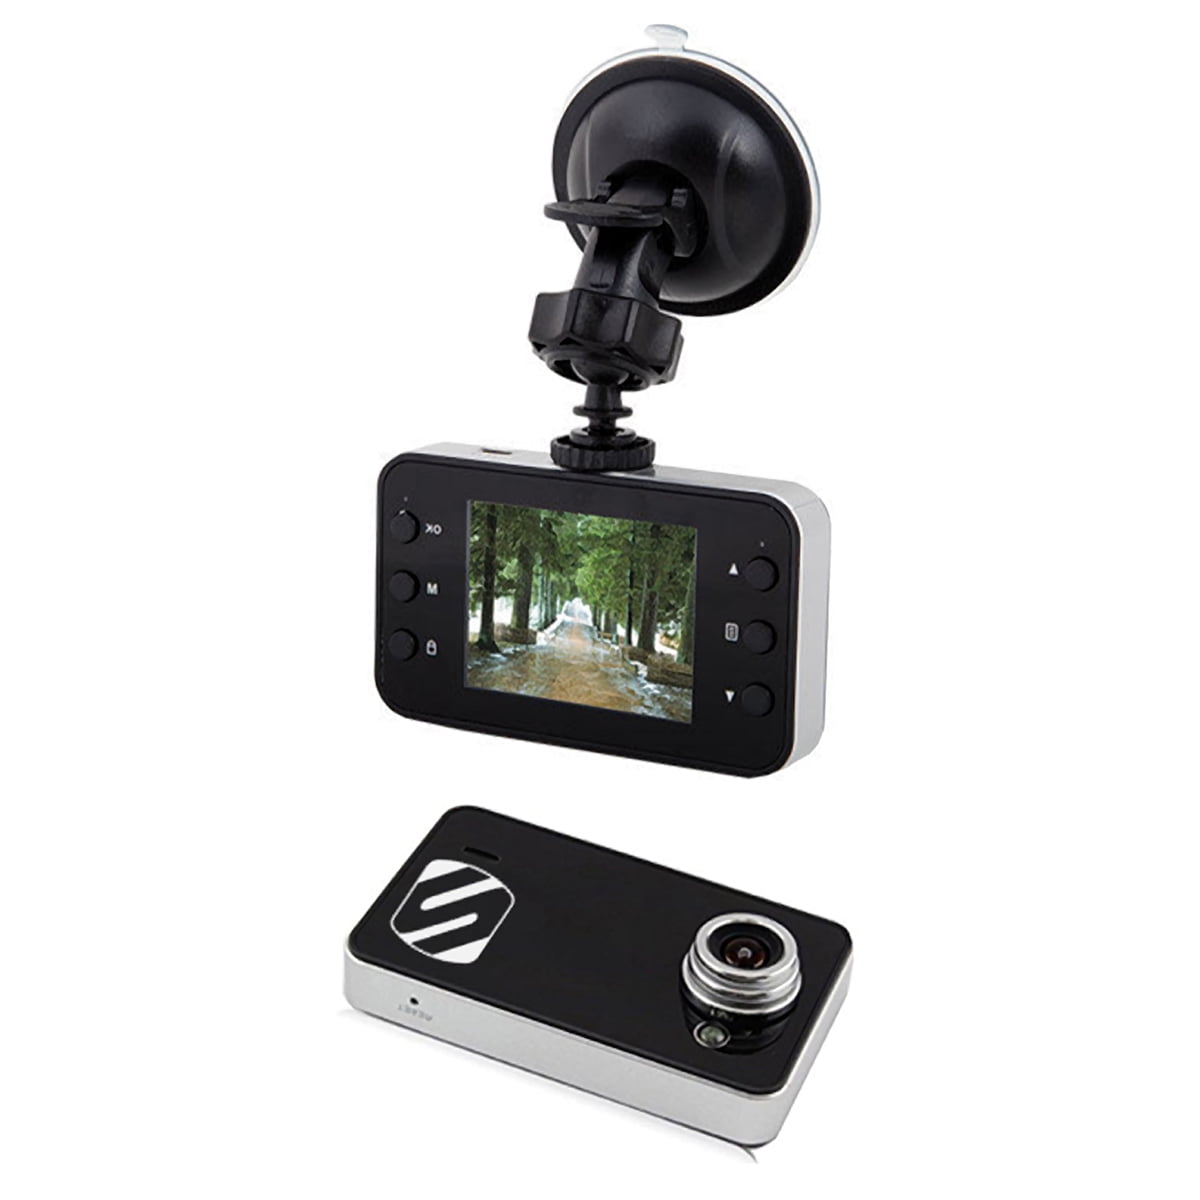  Scosche DDVR18G-ST2 HD DVR Night Vision Suction Cup